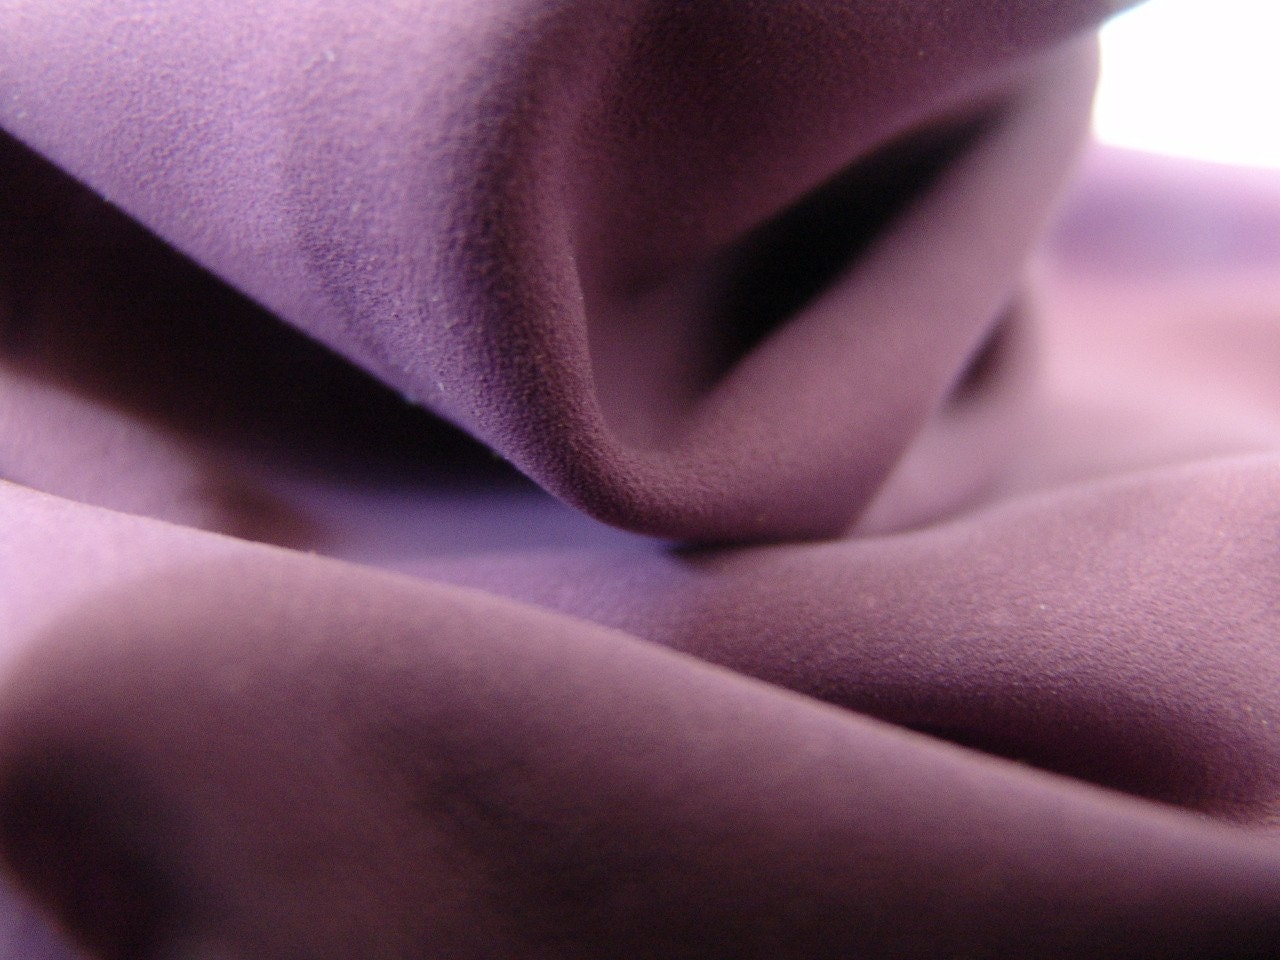 Lambsuede in soft purple - a full 5 square foot hide - ON SALE